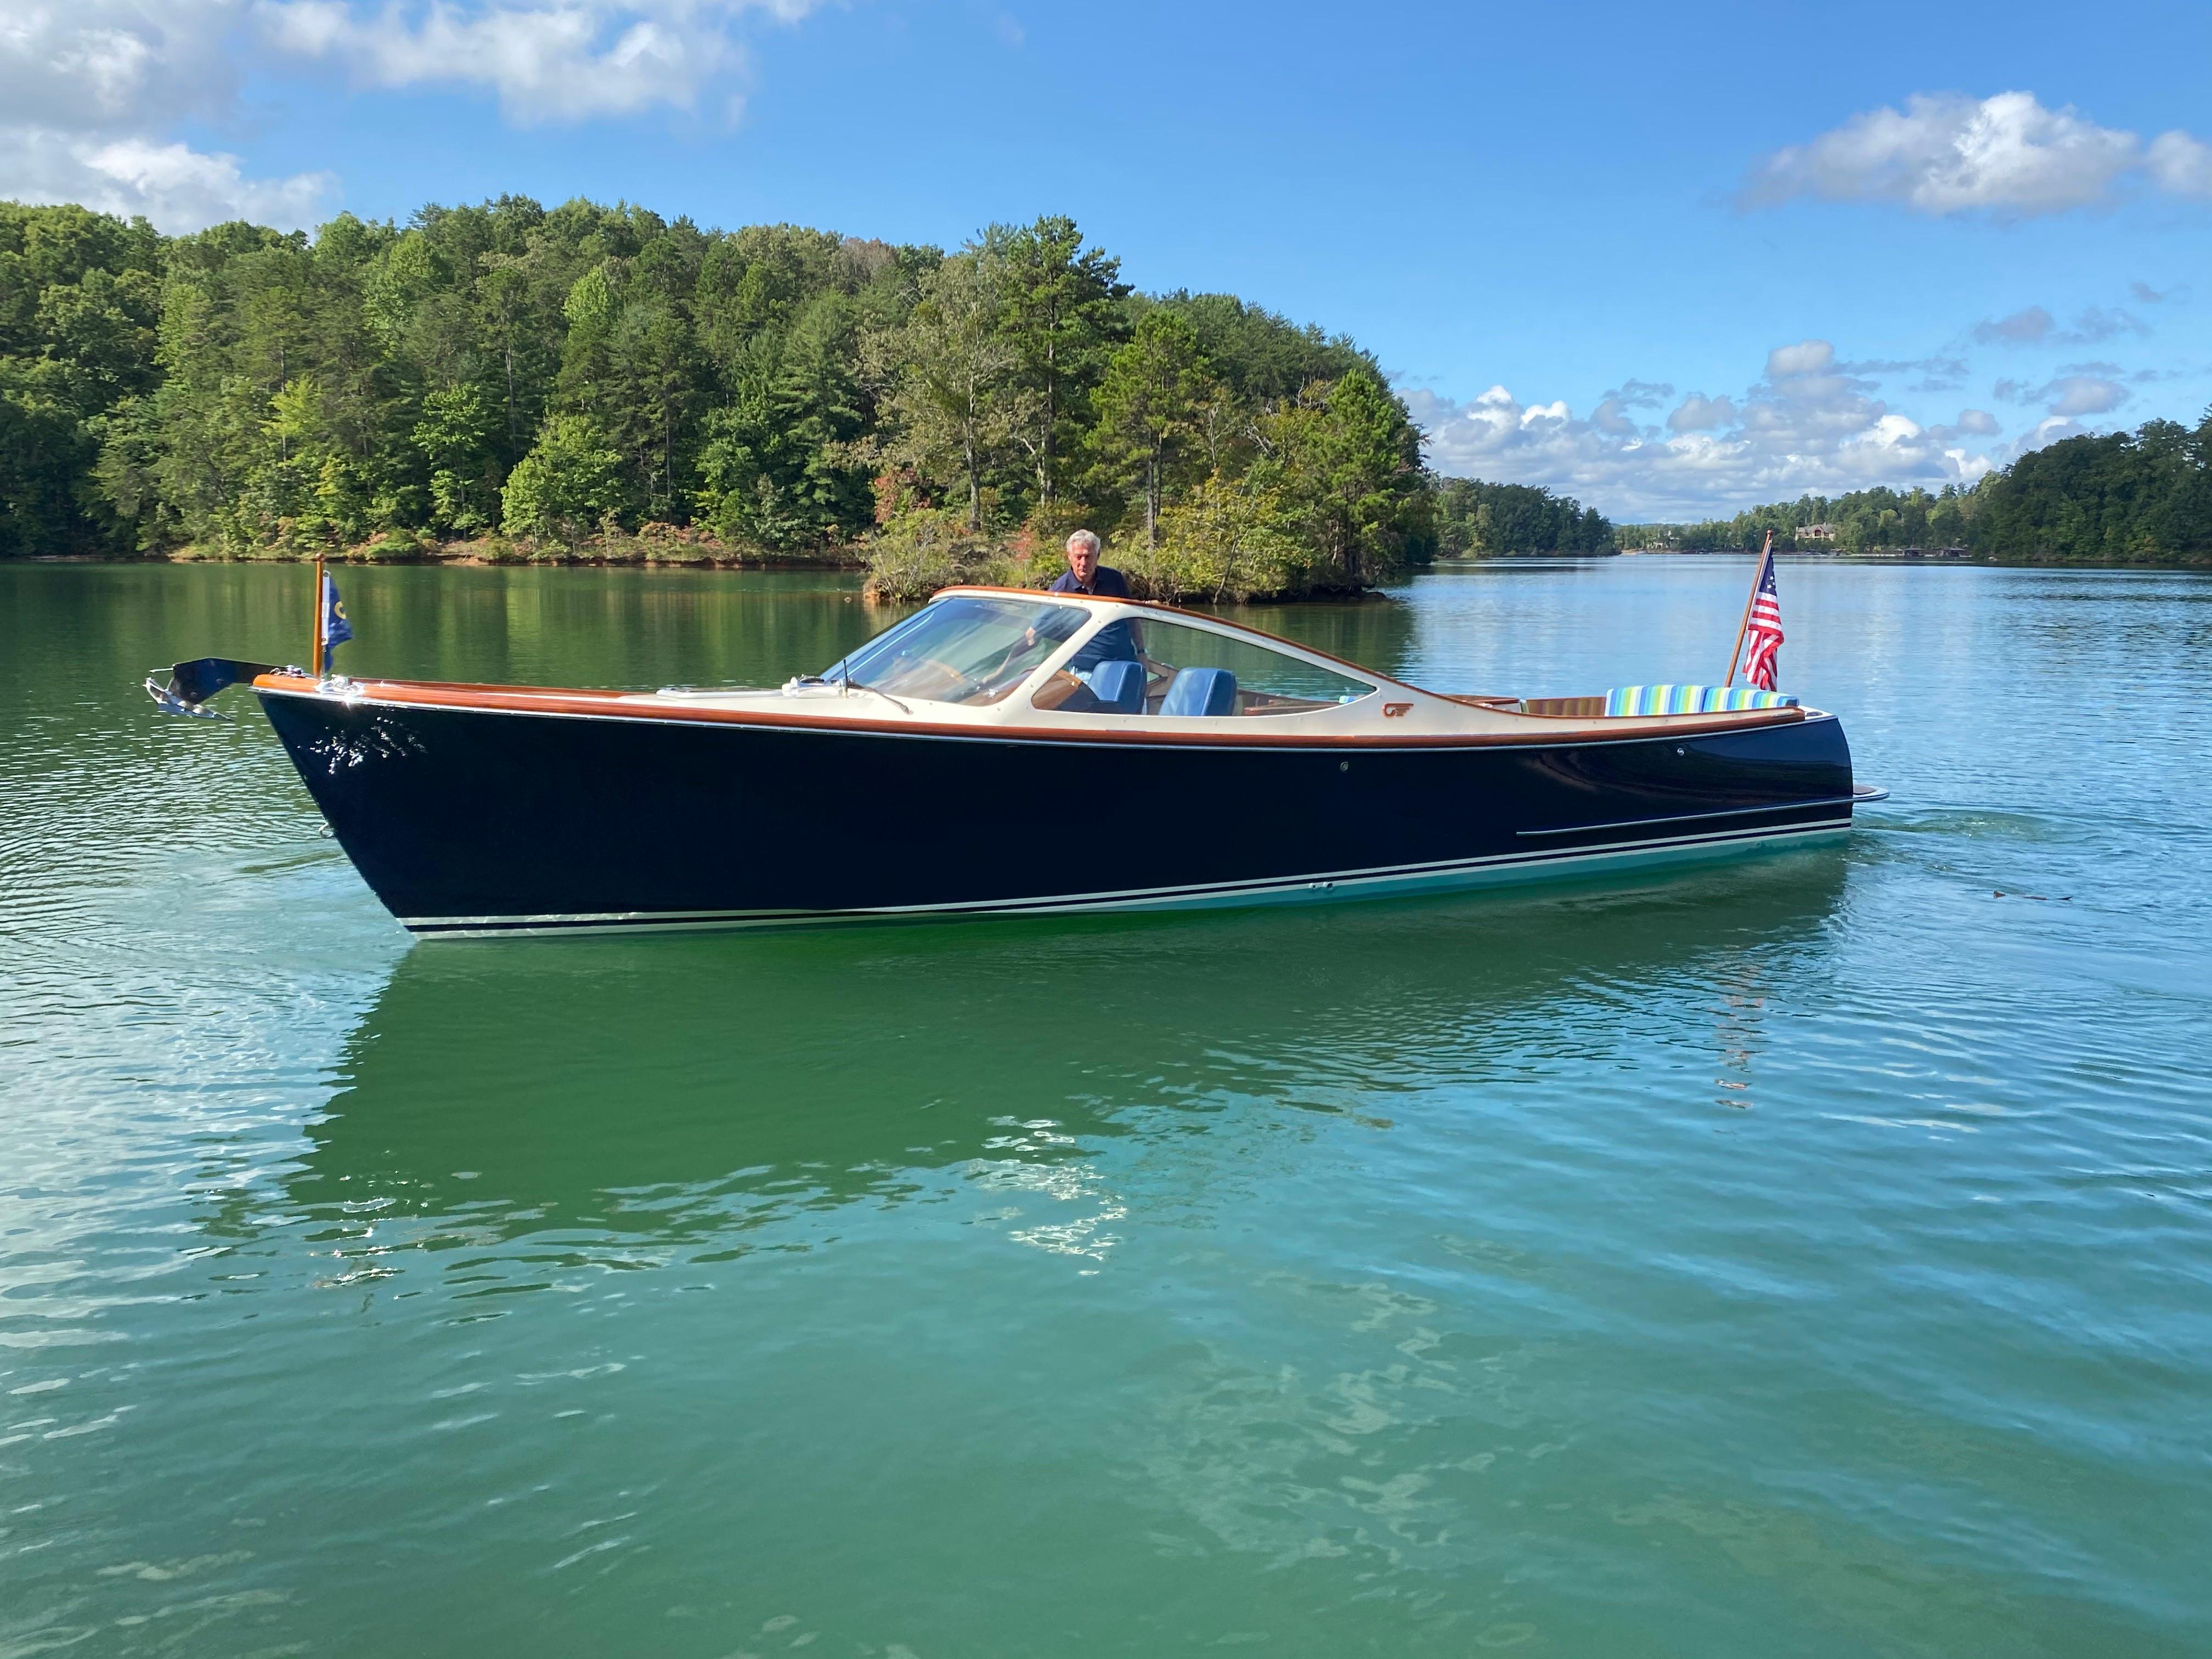 hinckley runabout 29 for sale